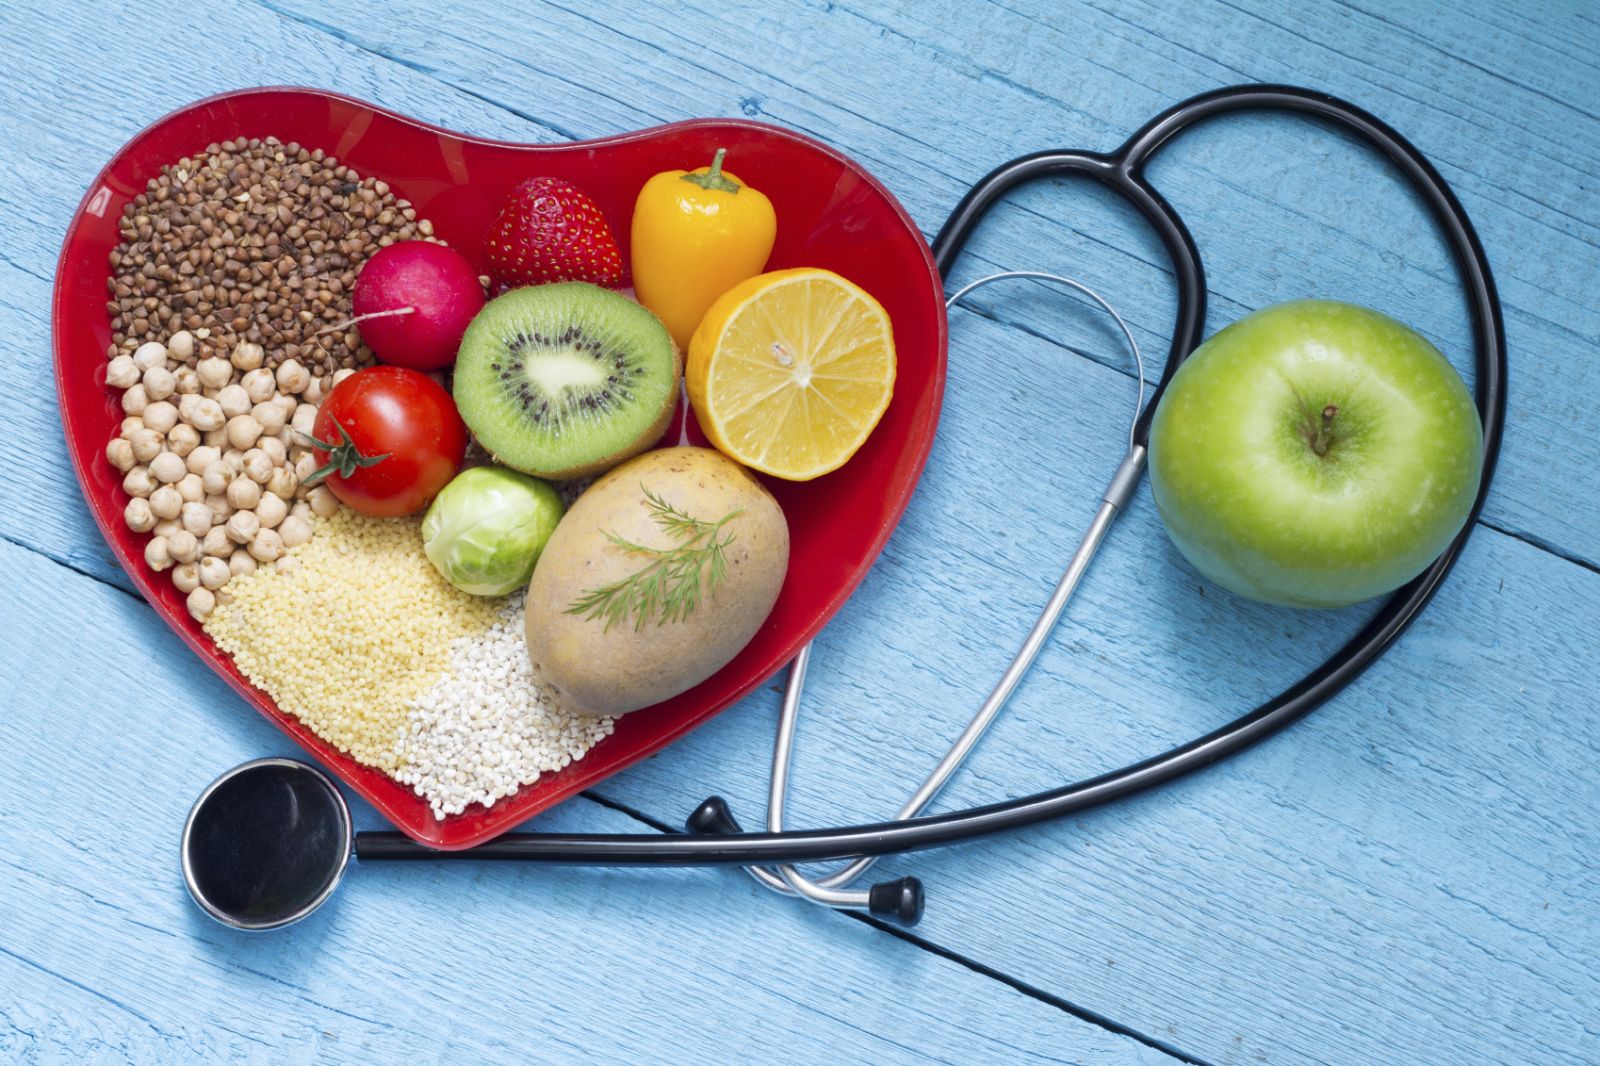 4 ways to eat your way to lower cholesterol - Harvard Health